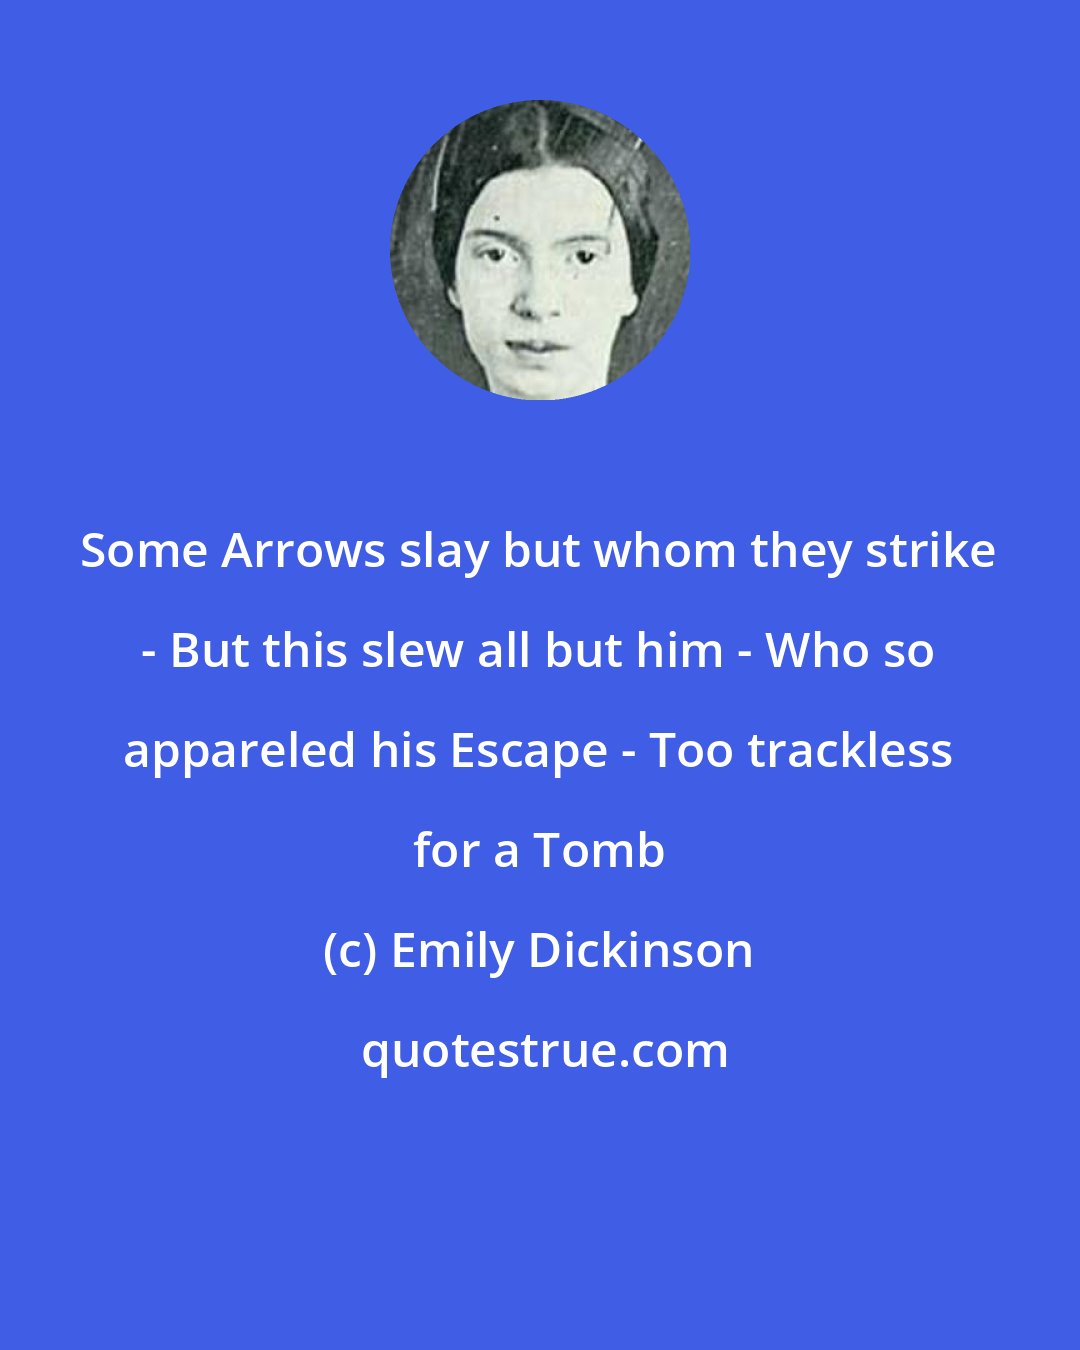 Emily Dickinson: Some Arrows slay but whom they strike - But this slew all but him - Who so appareled his Escape - Too trackless for a Tomb